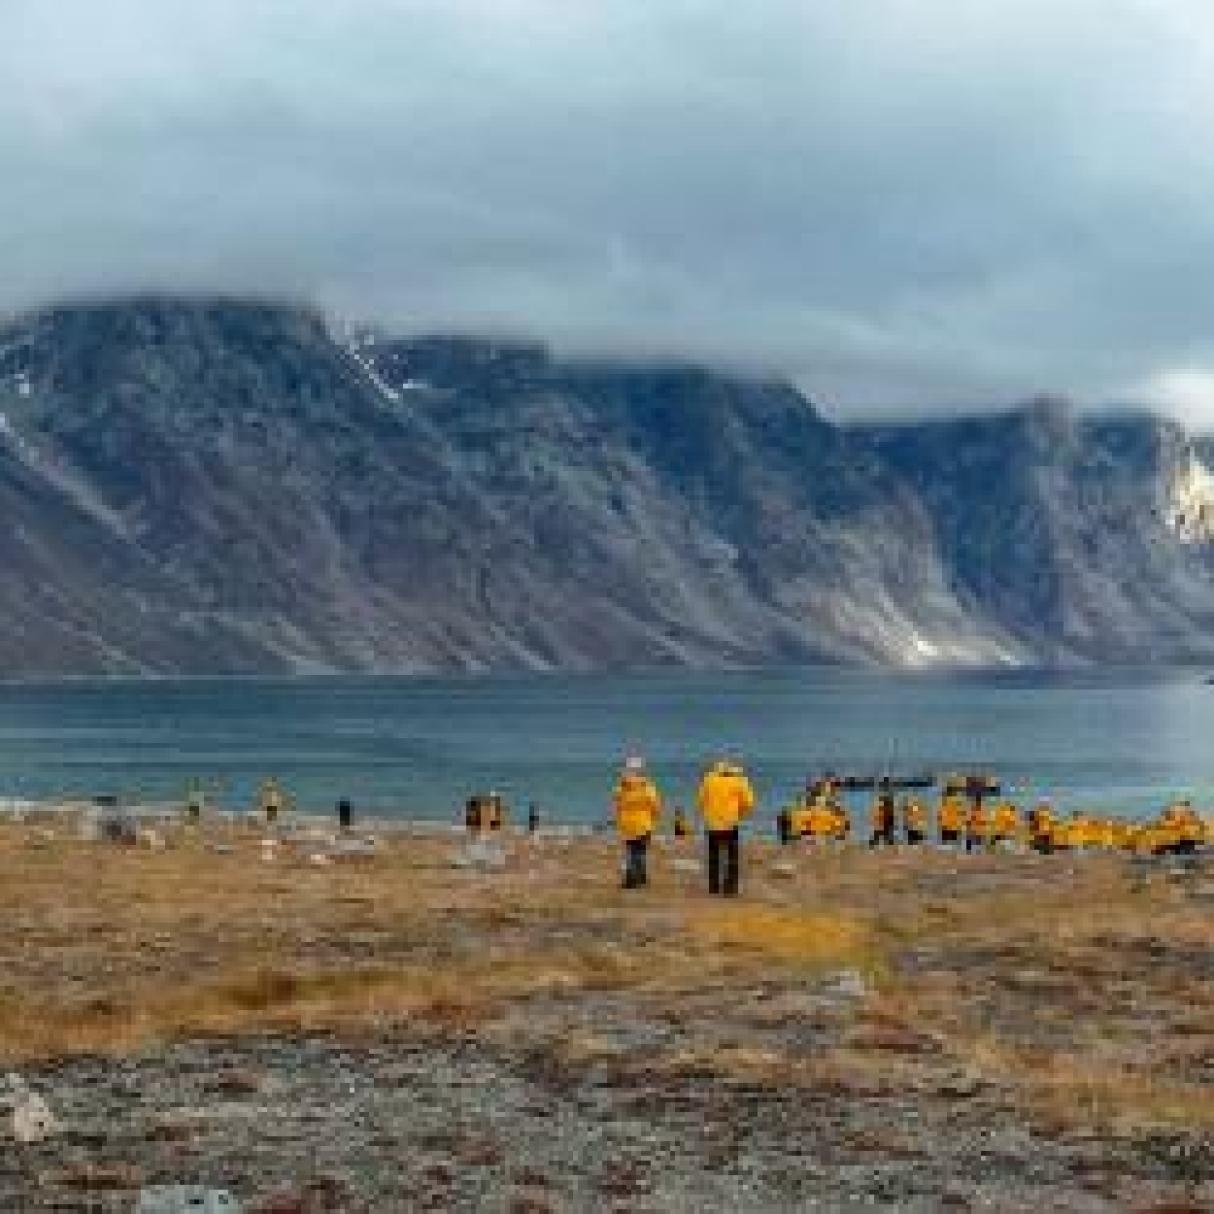 Large cliffs erupt from the arctic landscape covered with yellow grasses. 